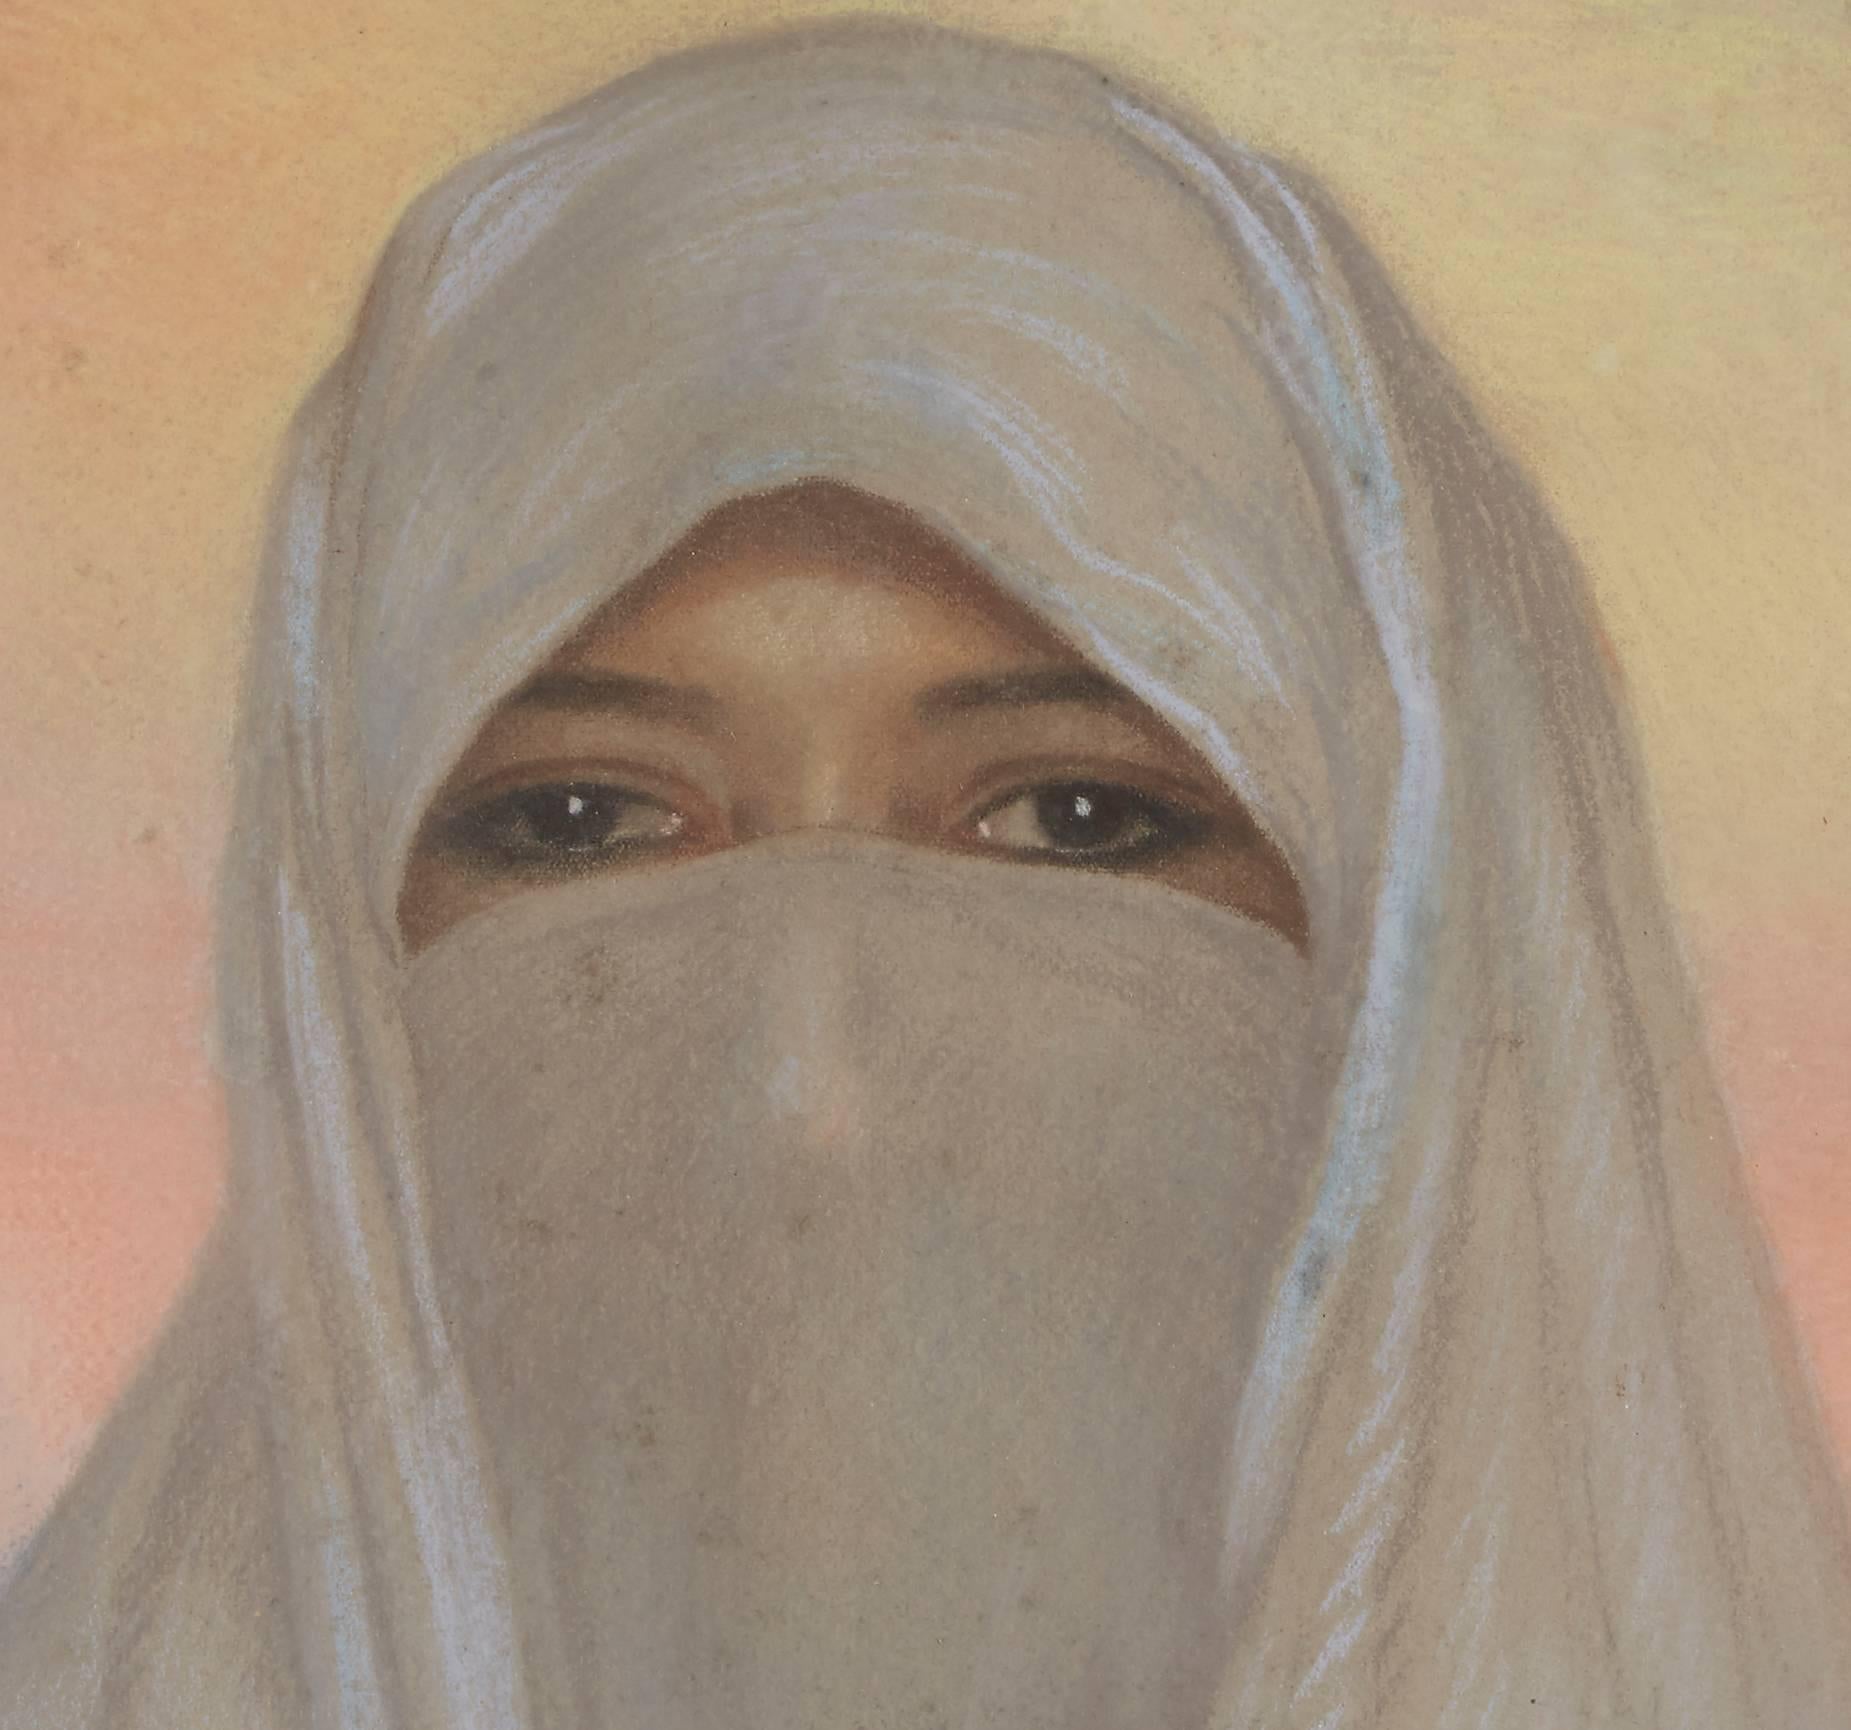 Veiled Woman - Painting by Francisco Gras